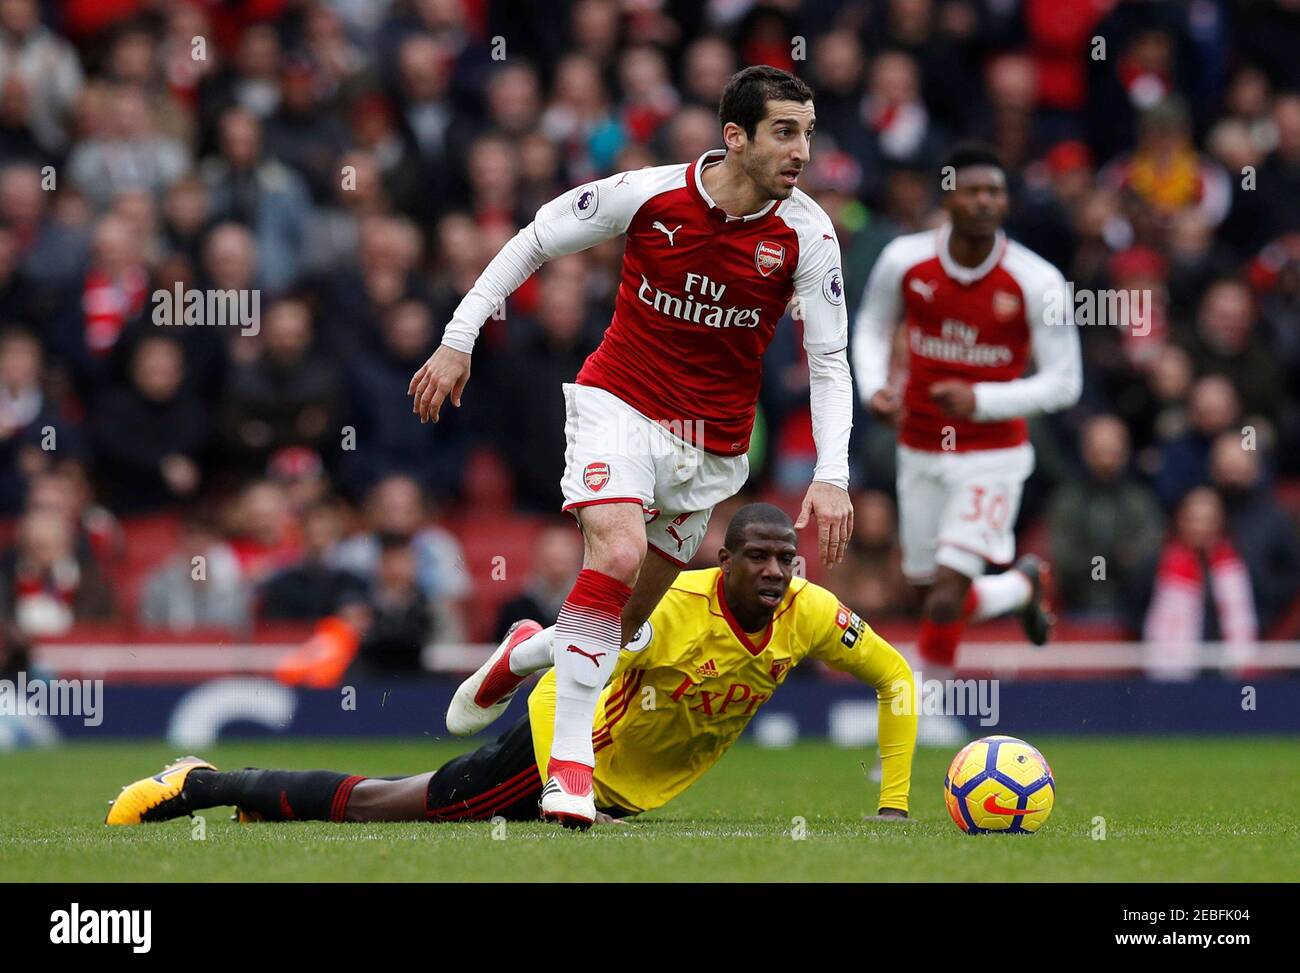 Soccer Football - Premier League - Arsenal vs Watford - Emirates Stadium, London, Britain - March 11, 2018   Arsenal's Henrikh Mkhitaryan in action with Watford's Abdoulaye Doucoure                 REUTERS/Eddie Keogh    EDITORIAL USE ONLY. No use with unauthorized audio, video, data, fixture lists, club/league logos or "live" services. Online in-match use limited to 75 images, no video emulation. No use in betting, games or single club/league/player publications.  Please contact your account representative for further details. Stock Photo